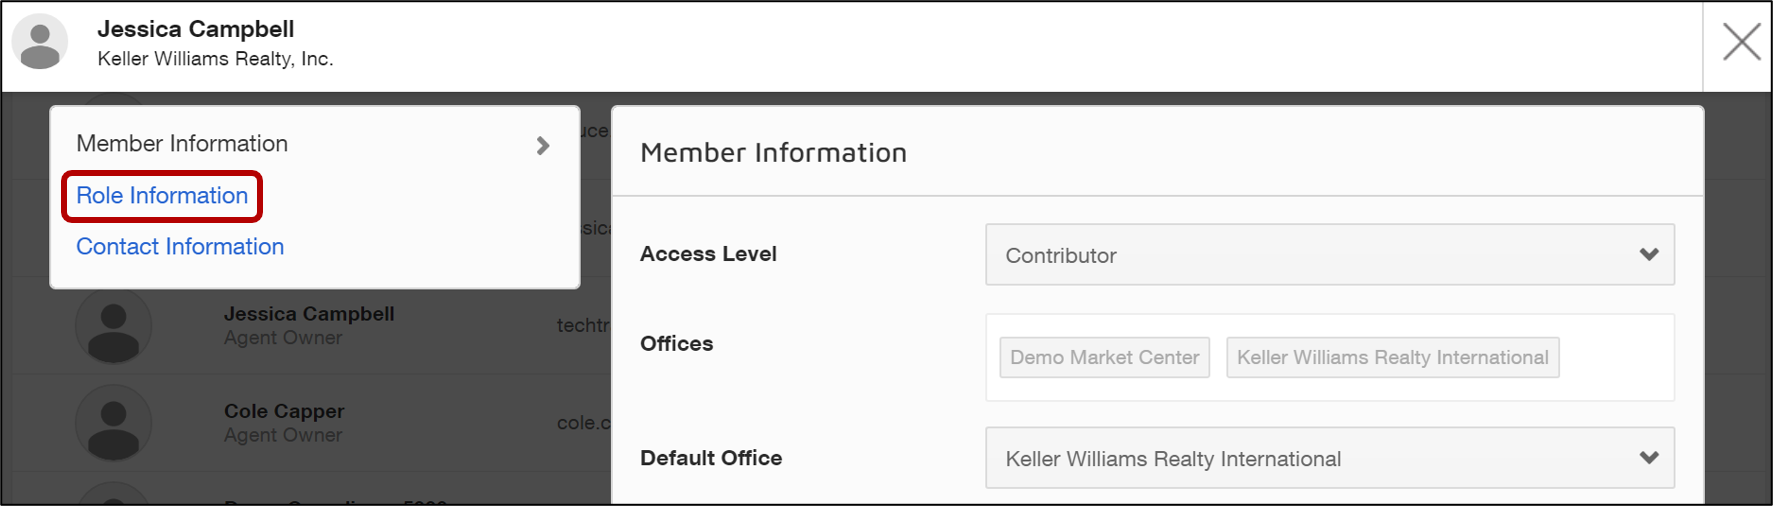 docusign_admin_role_info.png